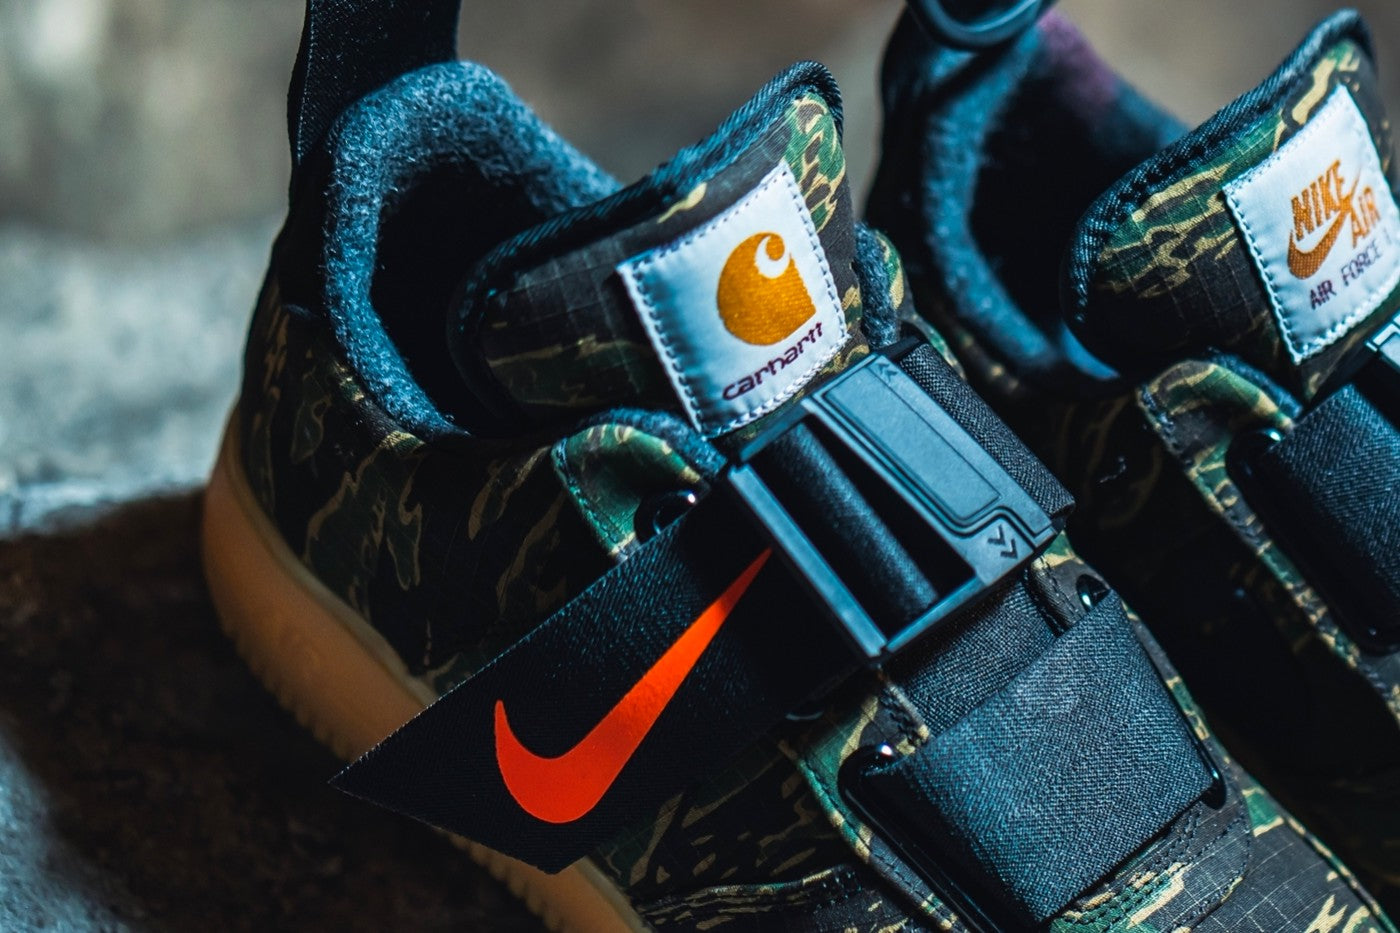 A Carhartt WIP x Nike womens SB Collaboration is Dropping